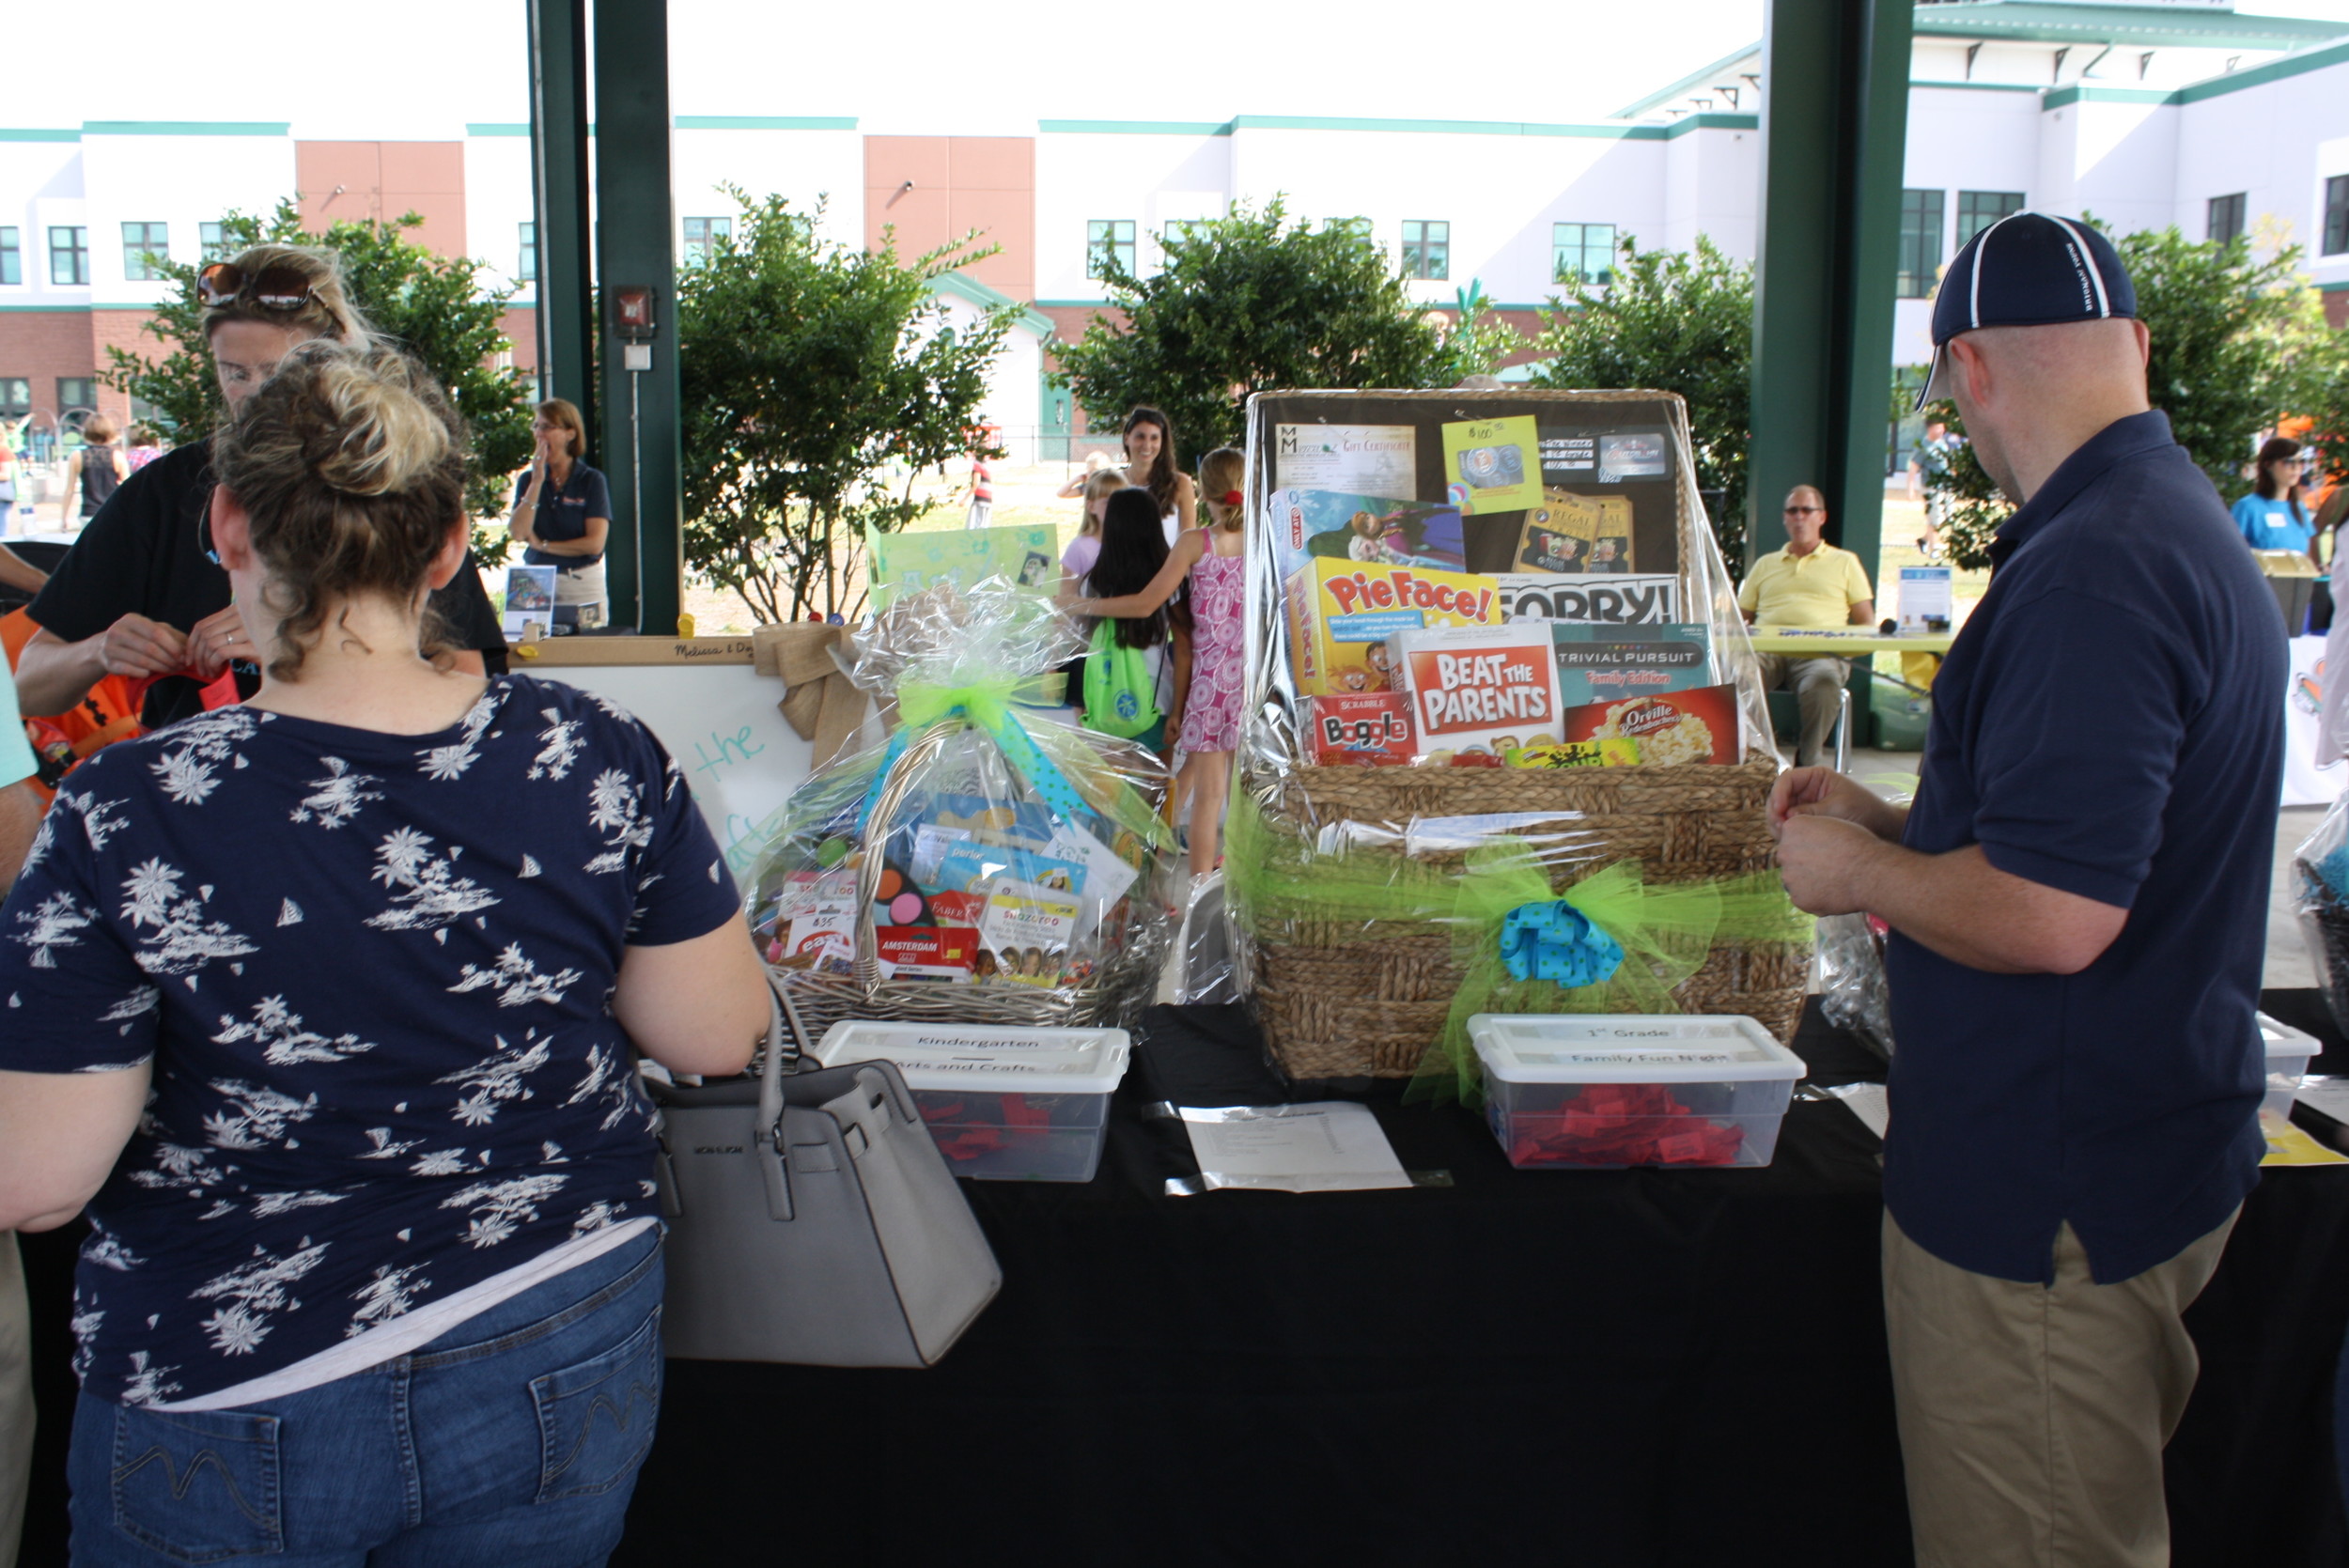 Area businesses donated family-friendly baskets for a raffle benefiting the school.